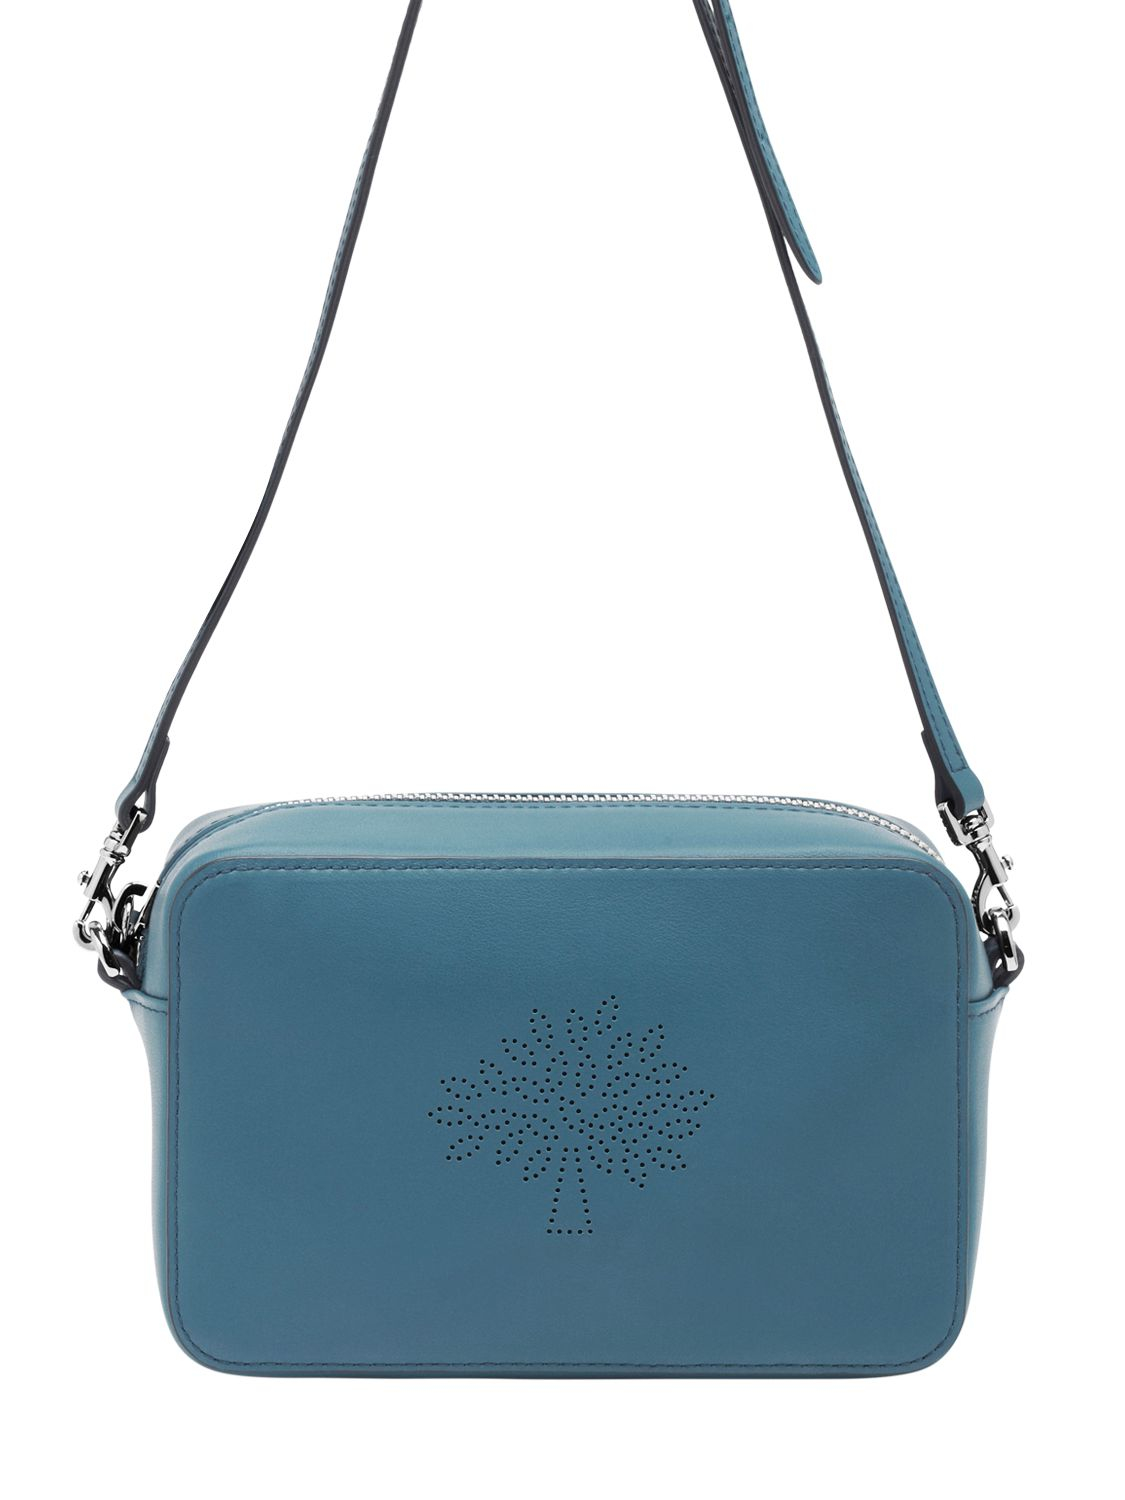 Mulberry Blossom Perforated Nappa Shoulder Bag in Blue - Lyst